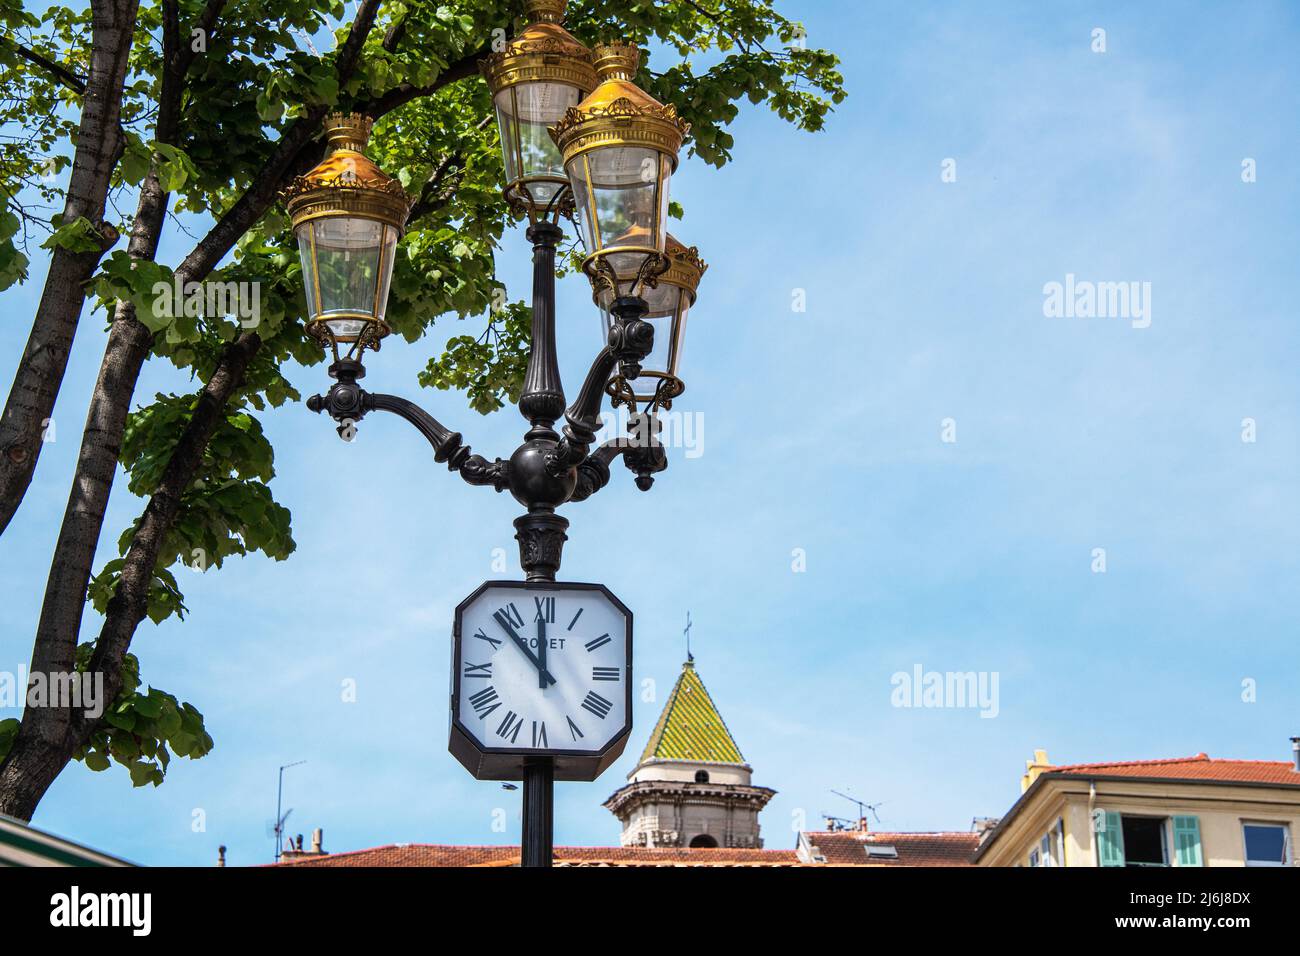 An ornate street light and clock in the flower Market, Nice, France. Stock Photo